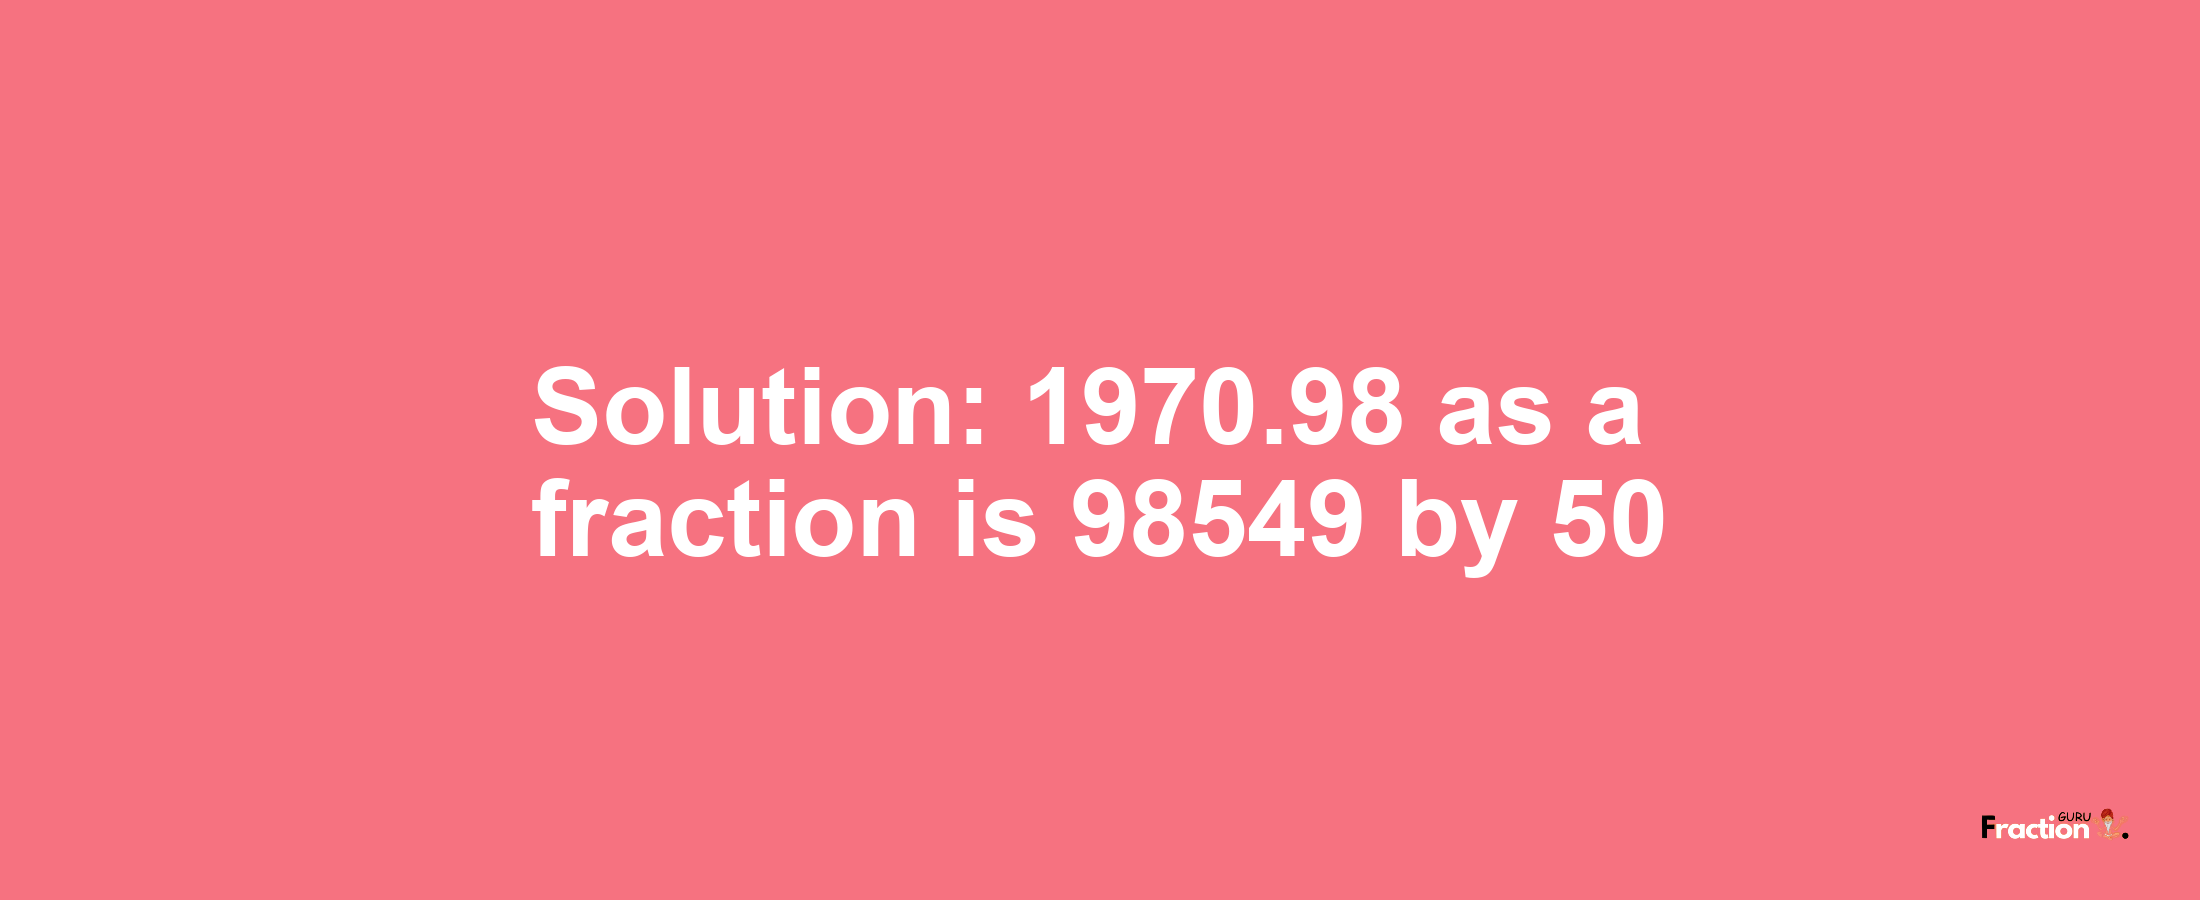 Solution:1970.98 as a fraction is 98549/50